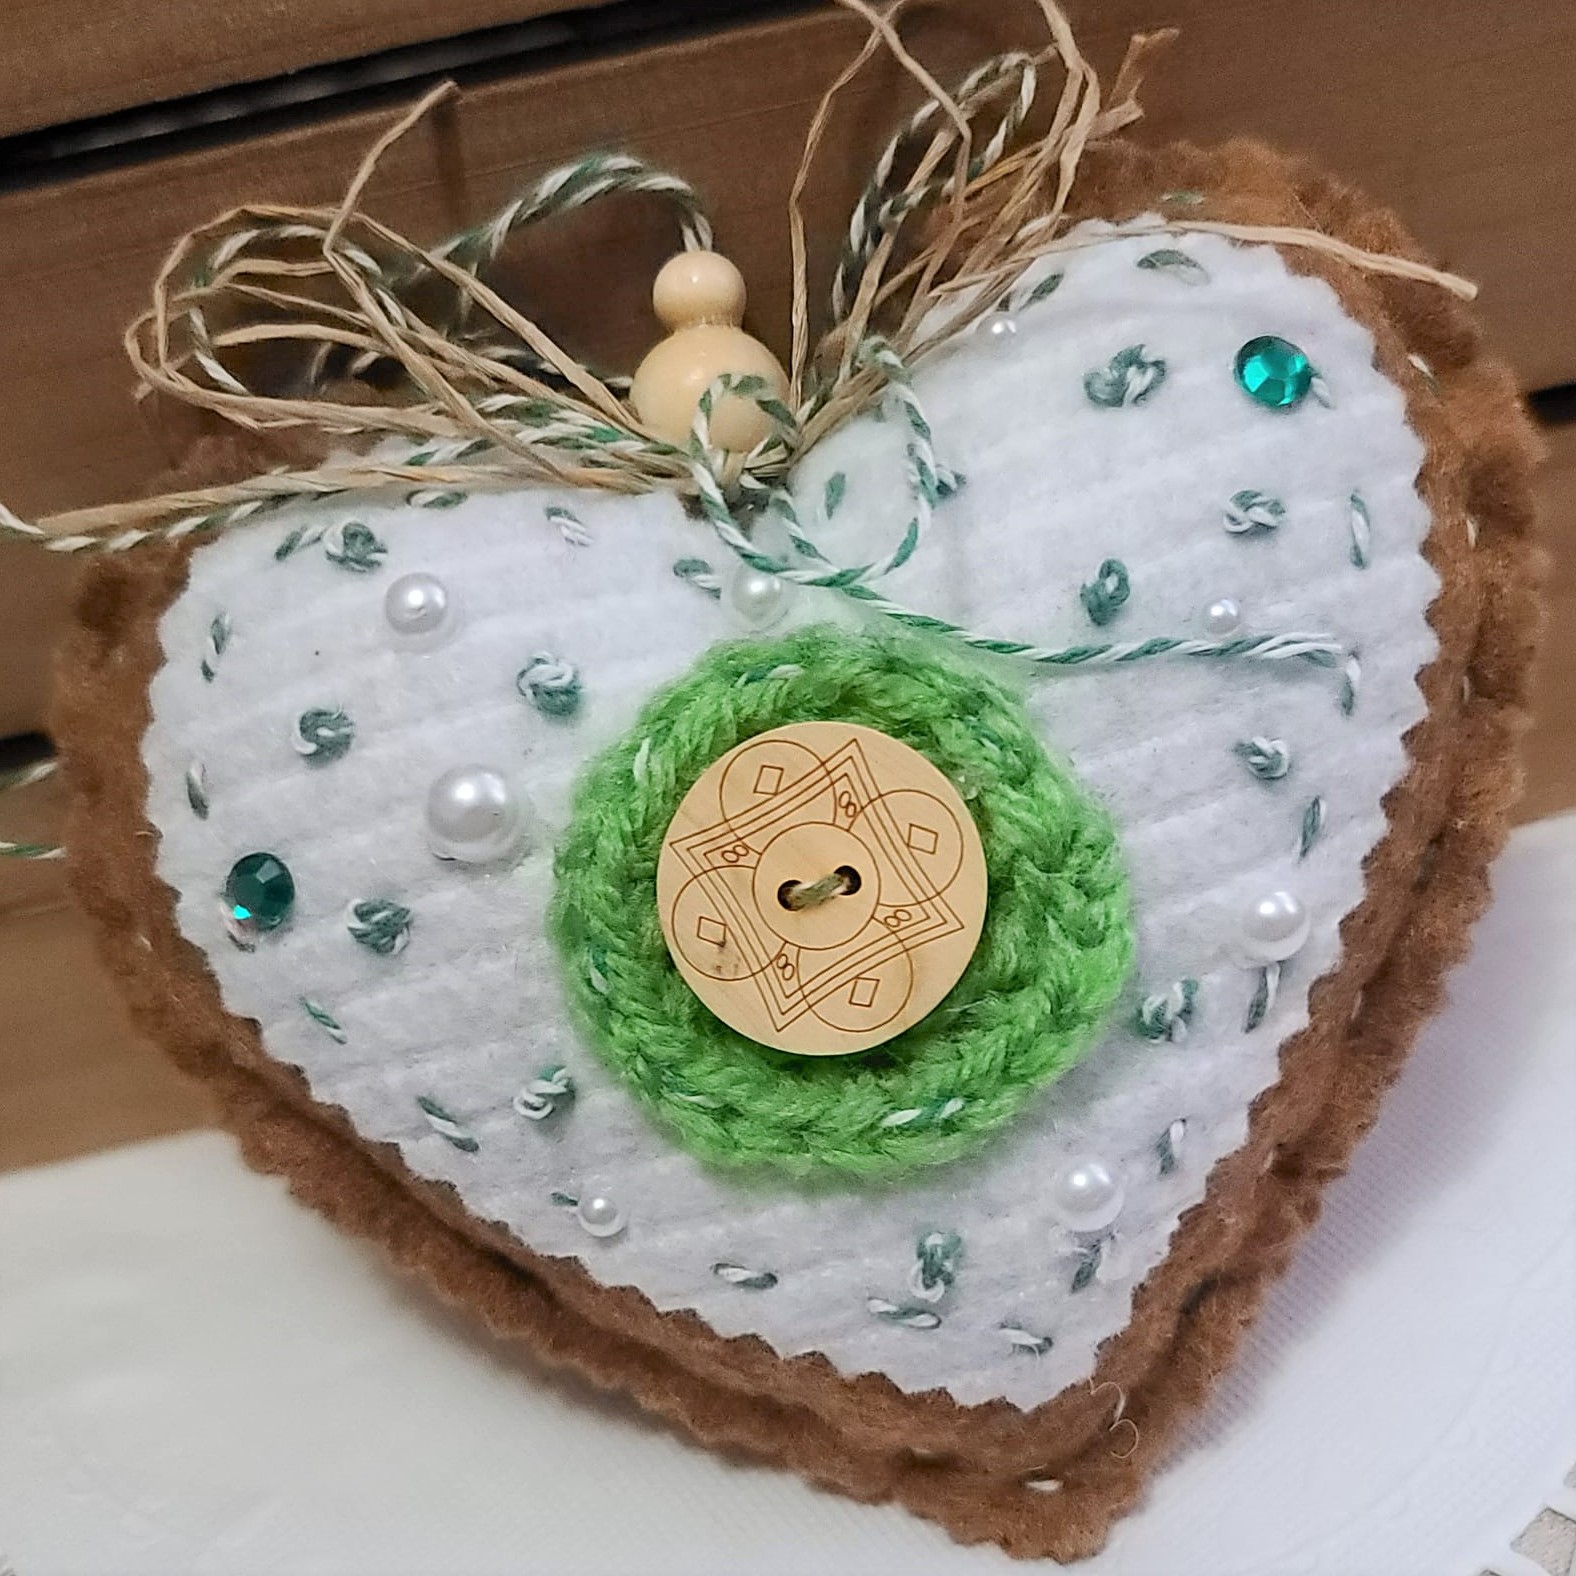 Gingerbread and icing felt with green accents celtic heart ornam